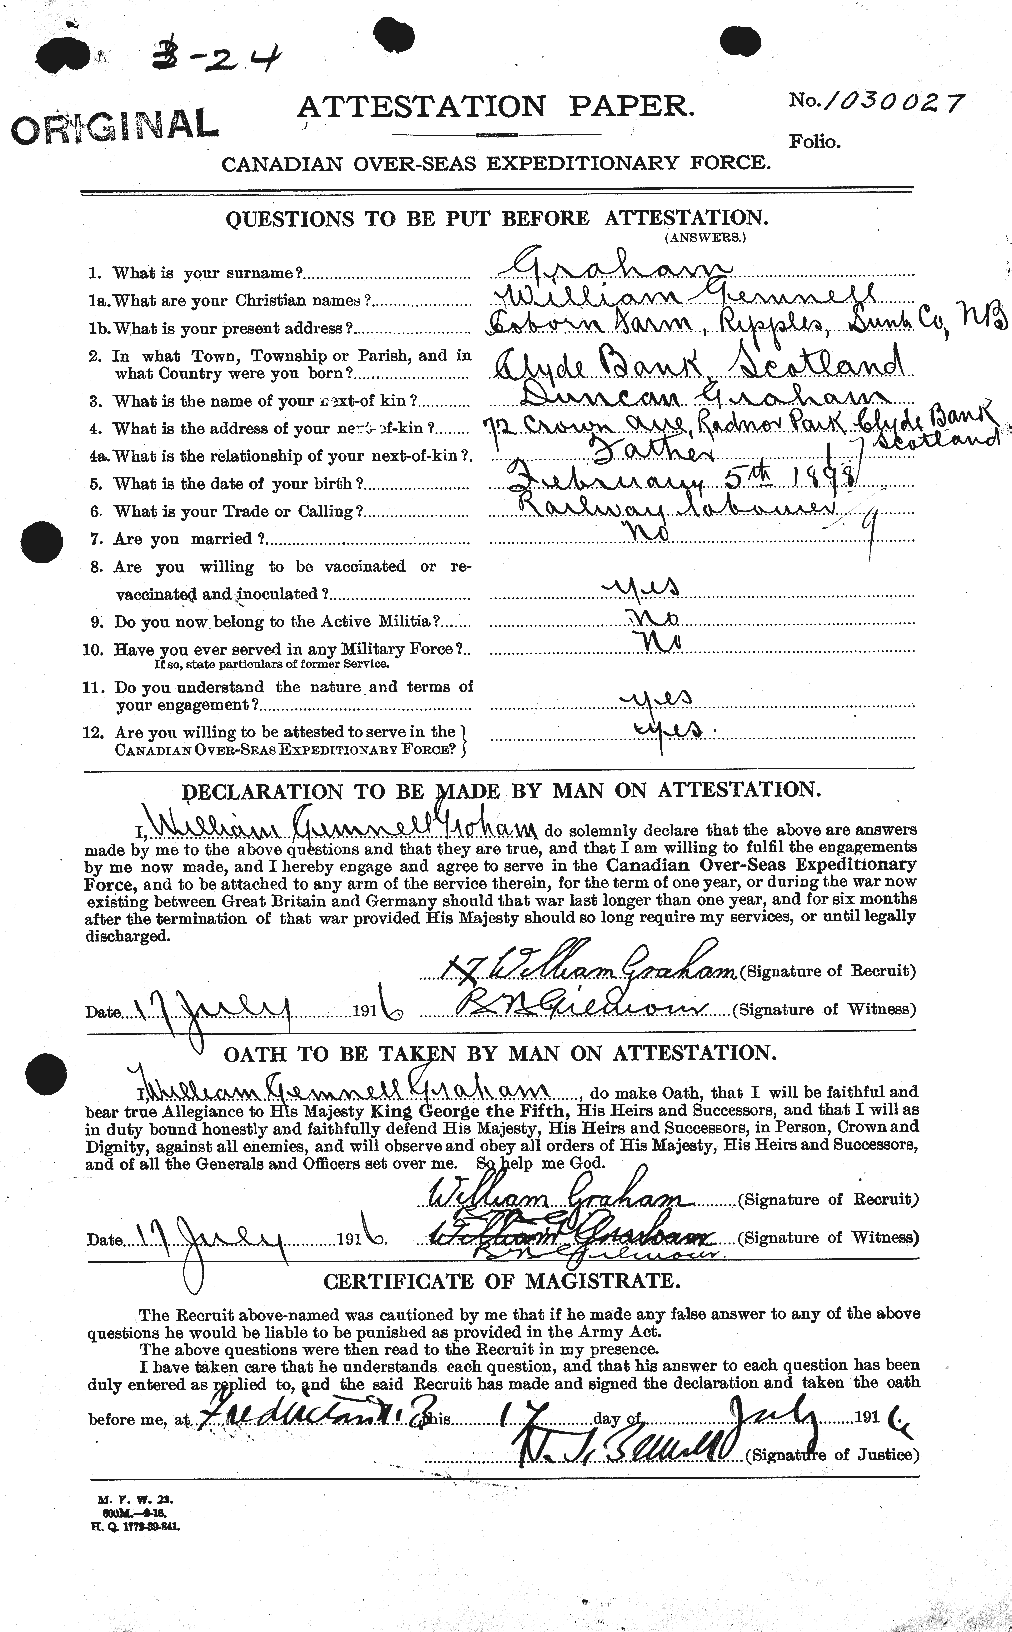 Personnel Records of the First World War - CEF 357994a